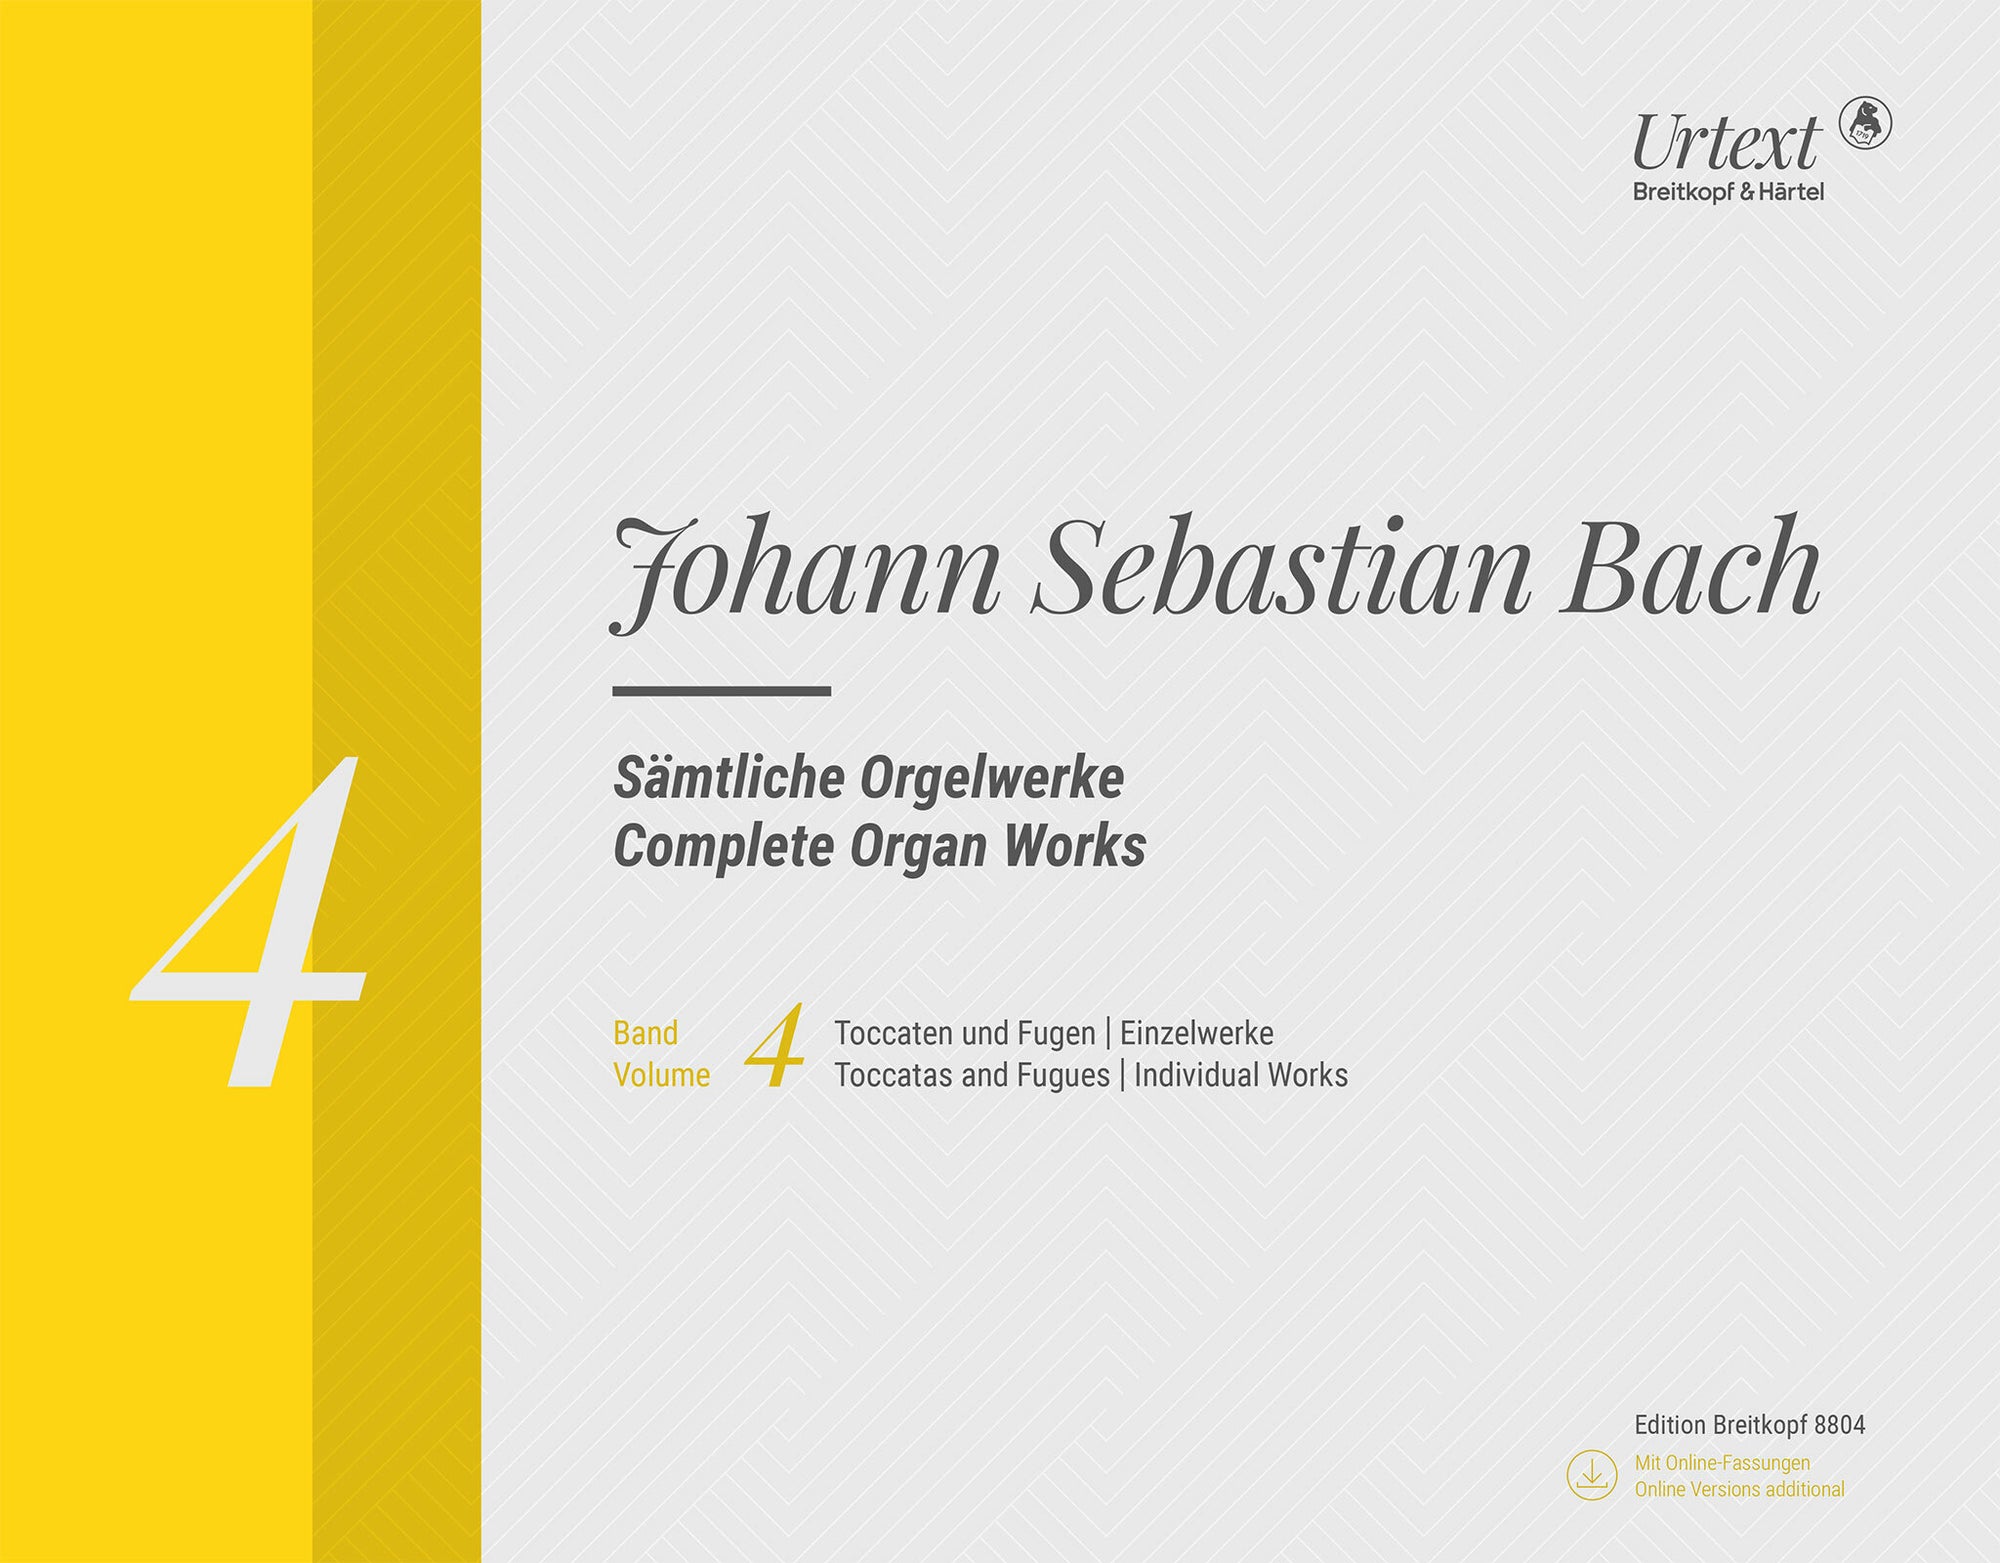 Bach: Complete Organ Works - Volume 4 (Toccatas and Fugues / Individual Works)